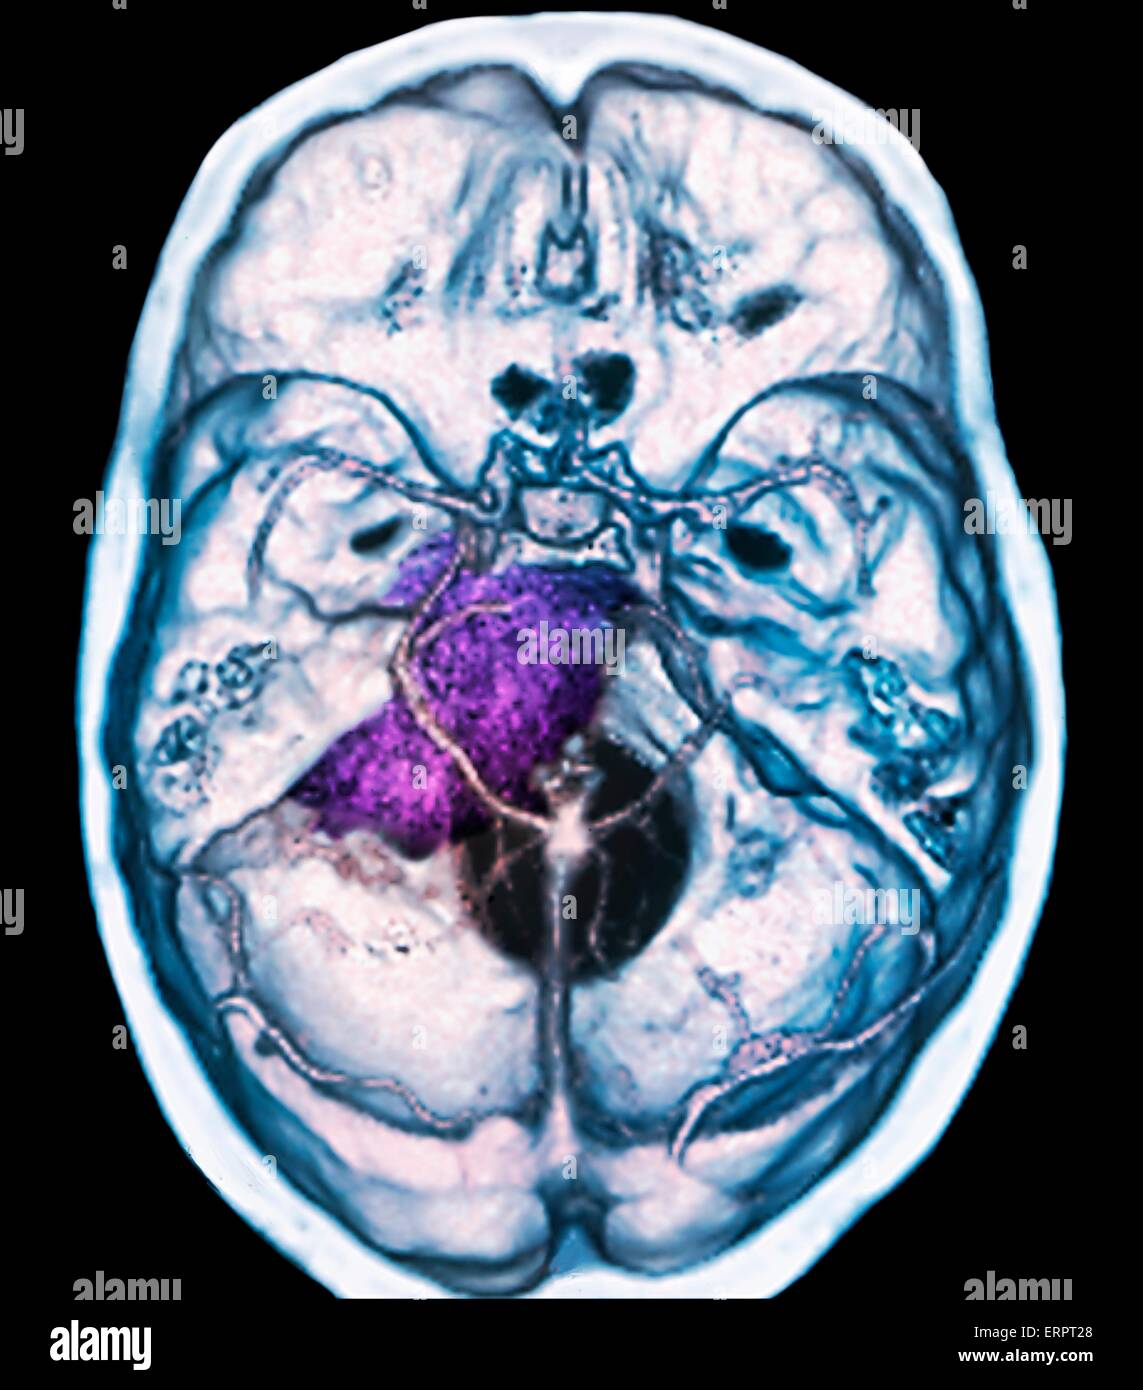 Benign brain tumour. Coloured computed tomography (CT) scan of the brain of a 48 year old patient with a meningioma (purple). This is a benign (non-cancerous) tumour that arises from the meninges, the membranes that surround the brain. Stock Photo